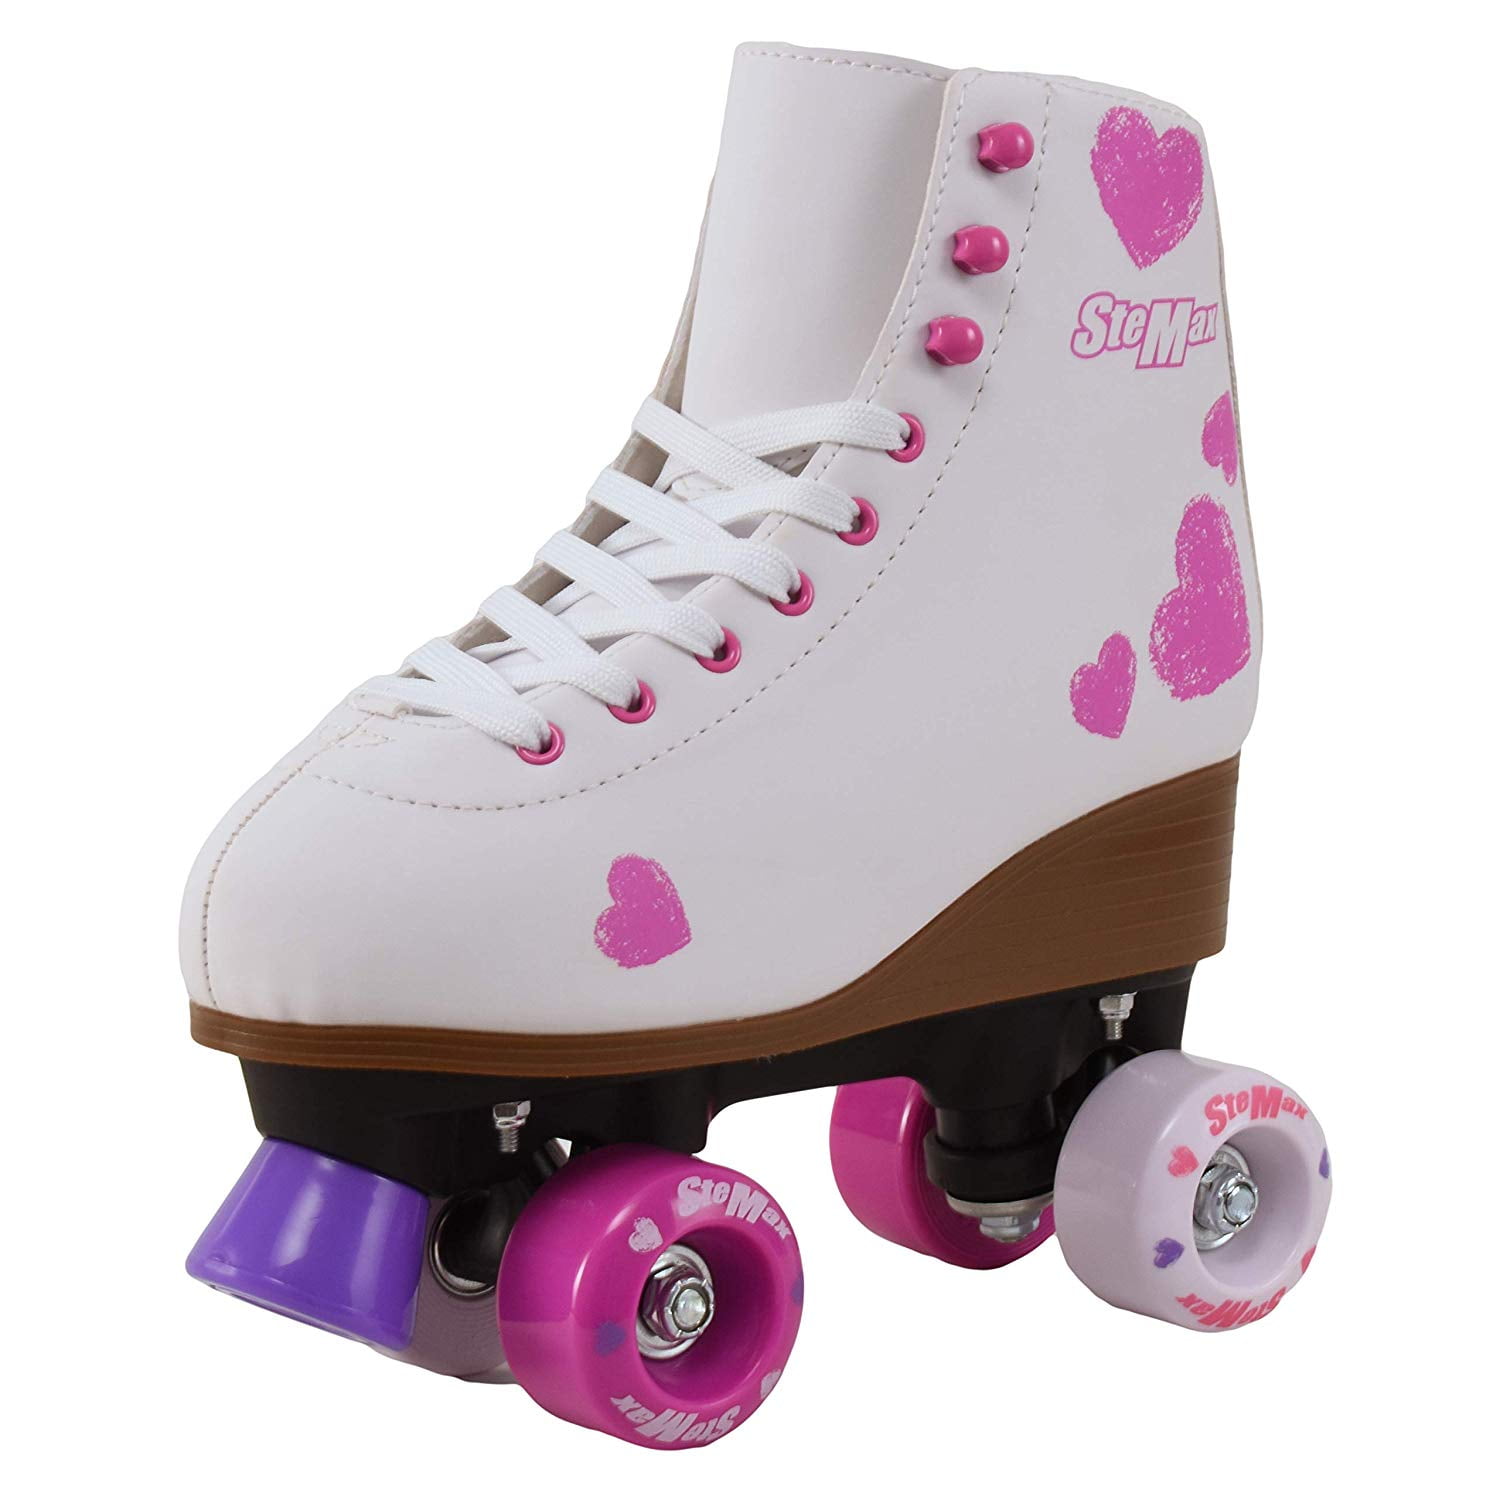 Quad Roller Skates for Girls and Women Size 5 Women Pink Flower Outdoor Derby 